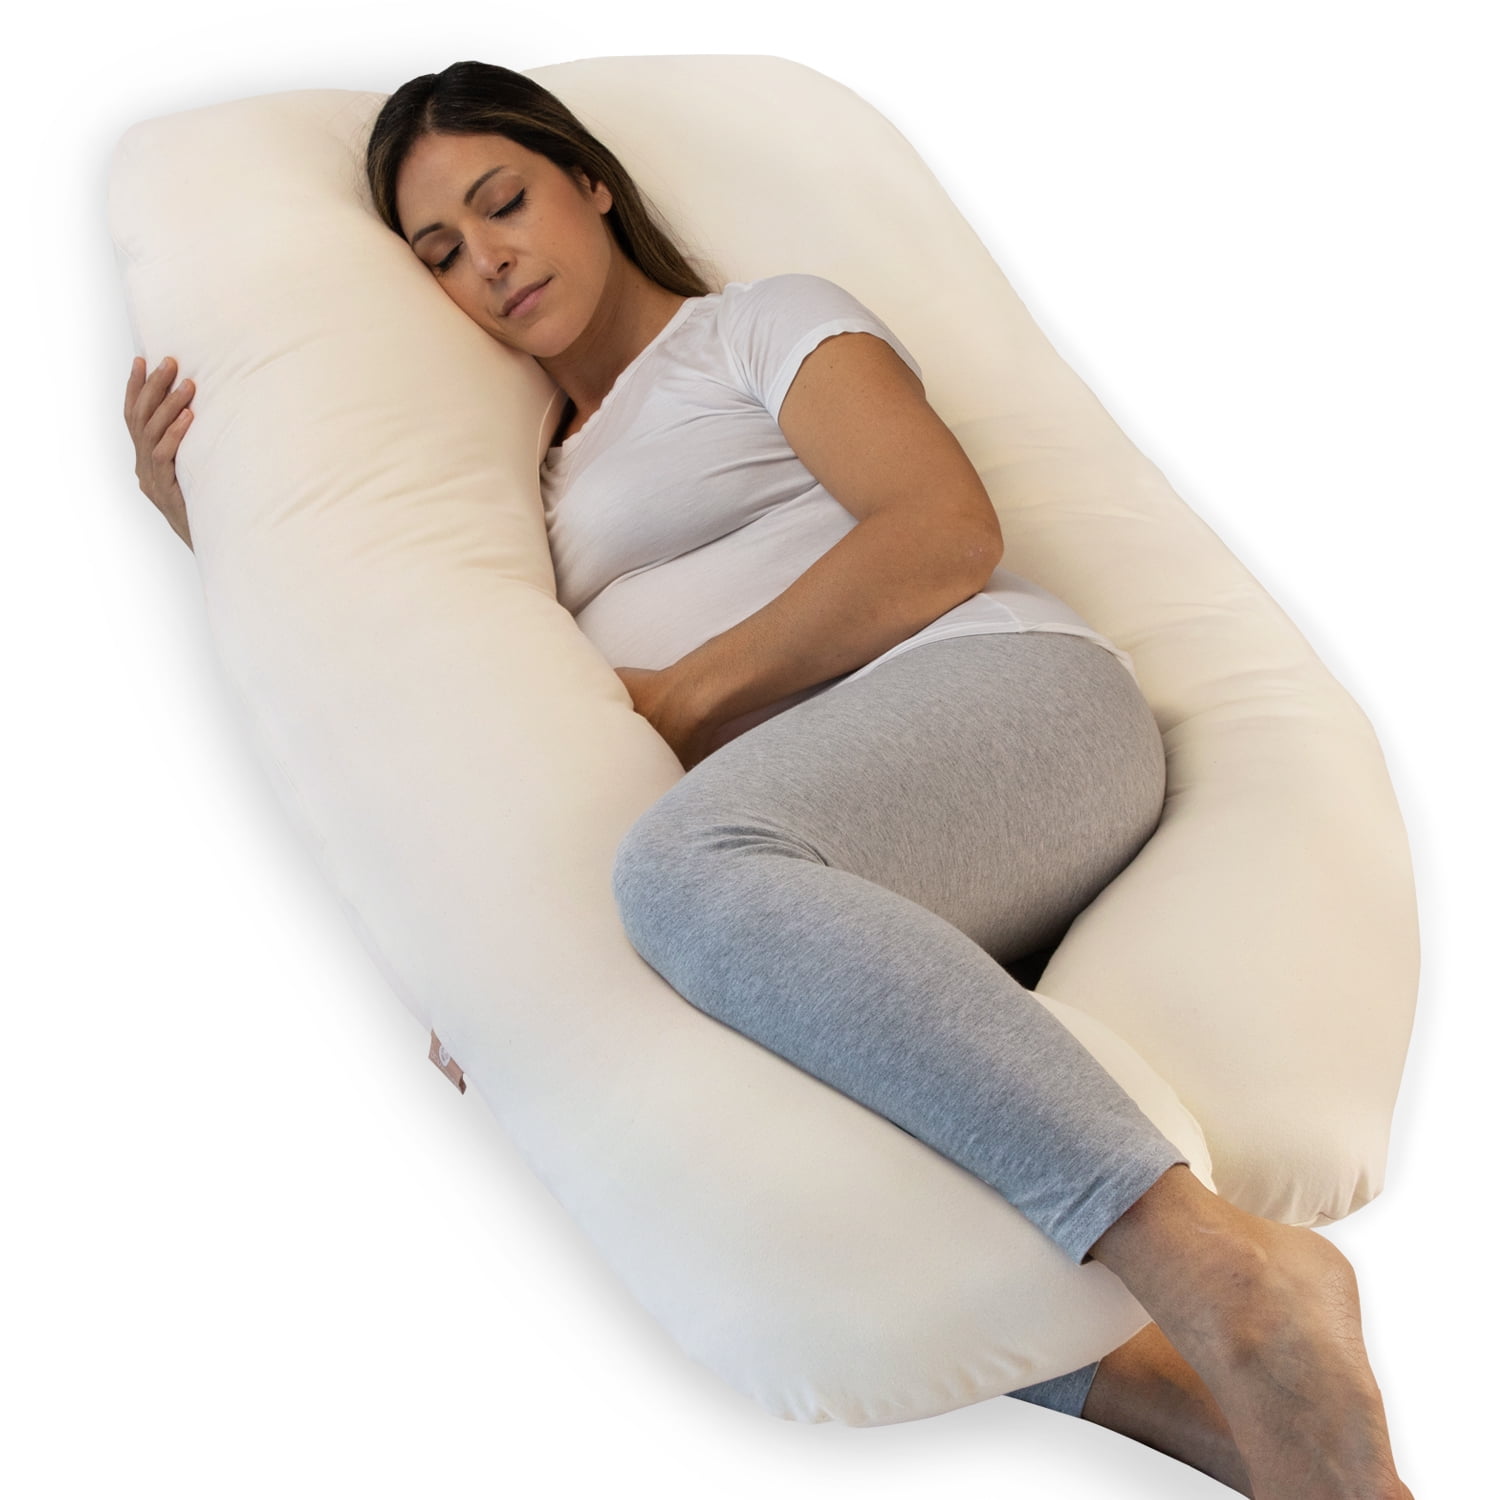 Extra Comfort U-Shaped Pregnancy Pillow Case Maternity Full Body Support White 